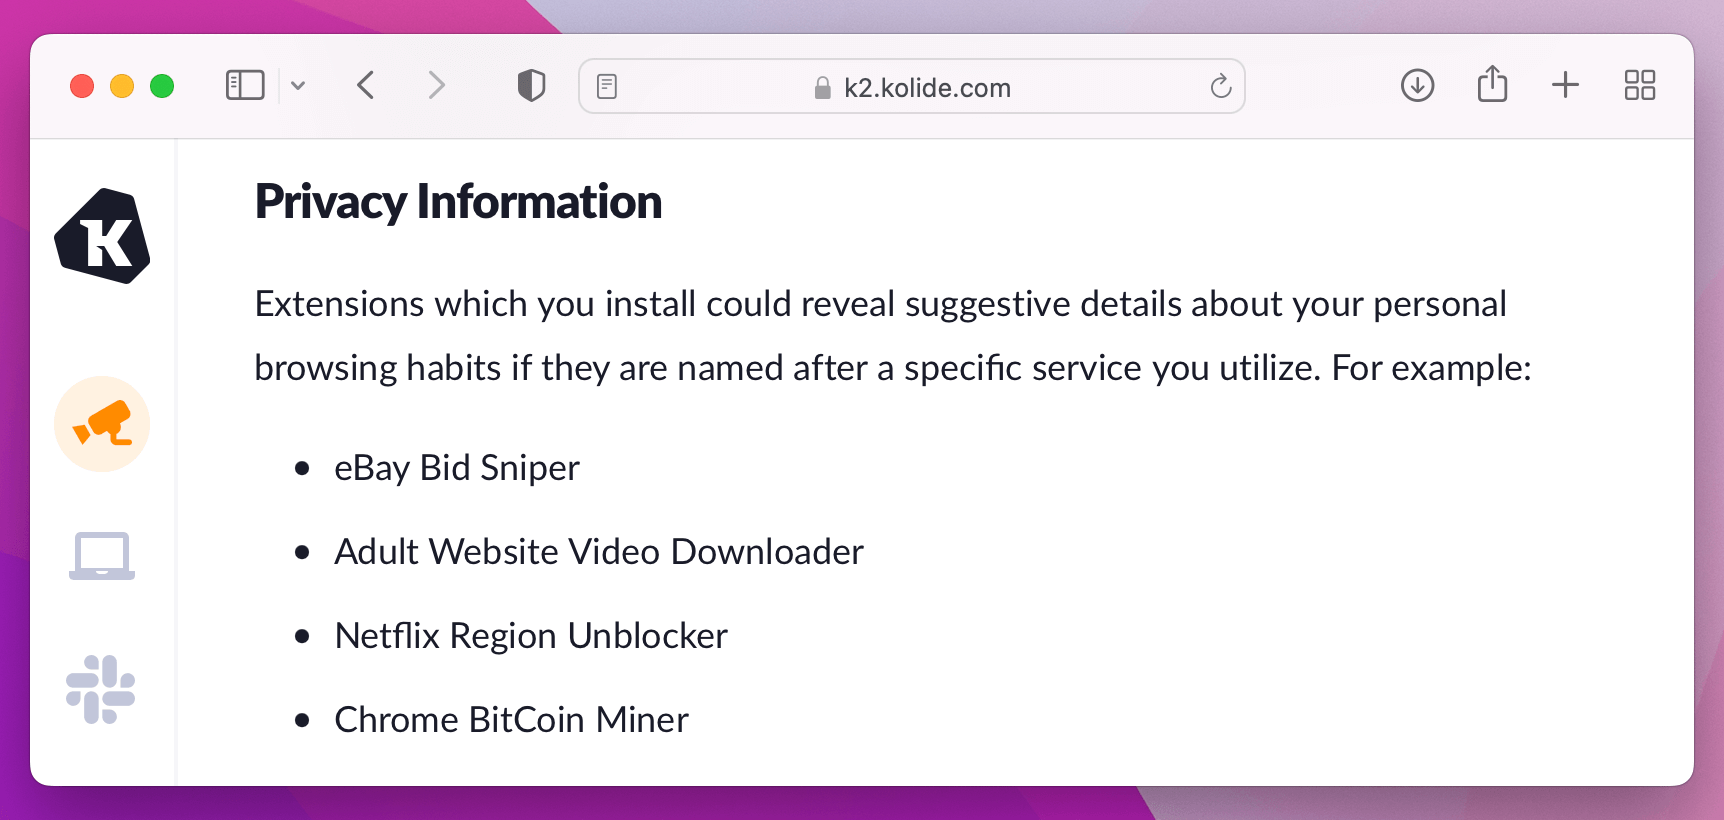 A screenshot of Kolide's privacy center explaining that Google Chrome extensions can reveal personal information, such as a Netflix region unblocker or a Bitcoin miner